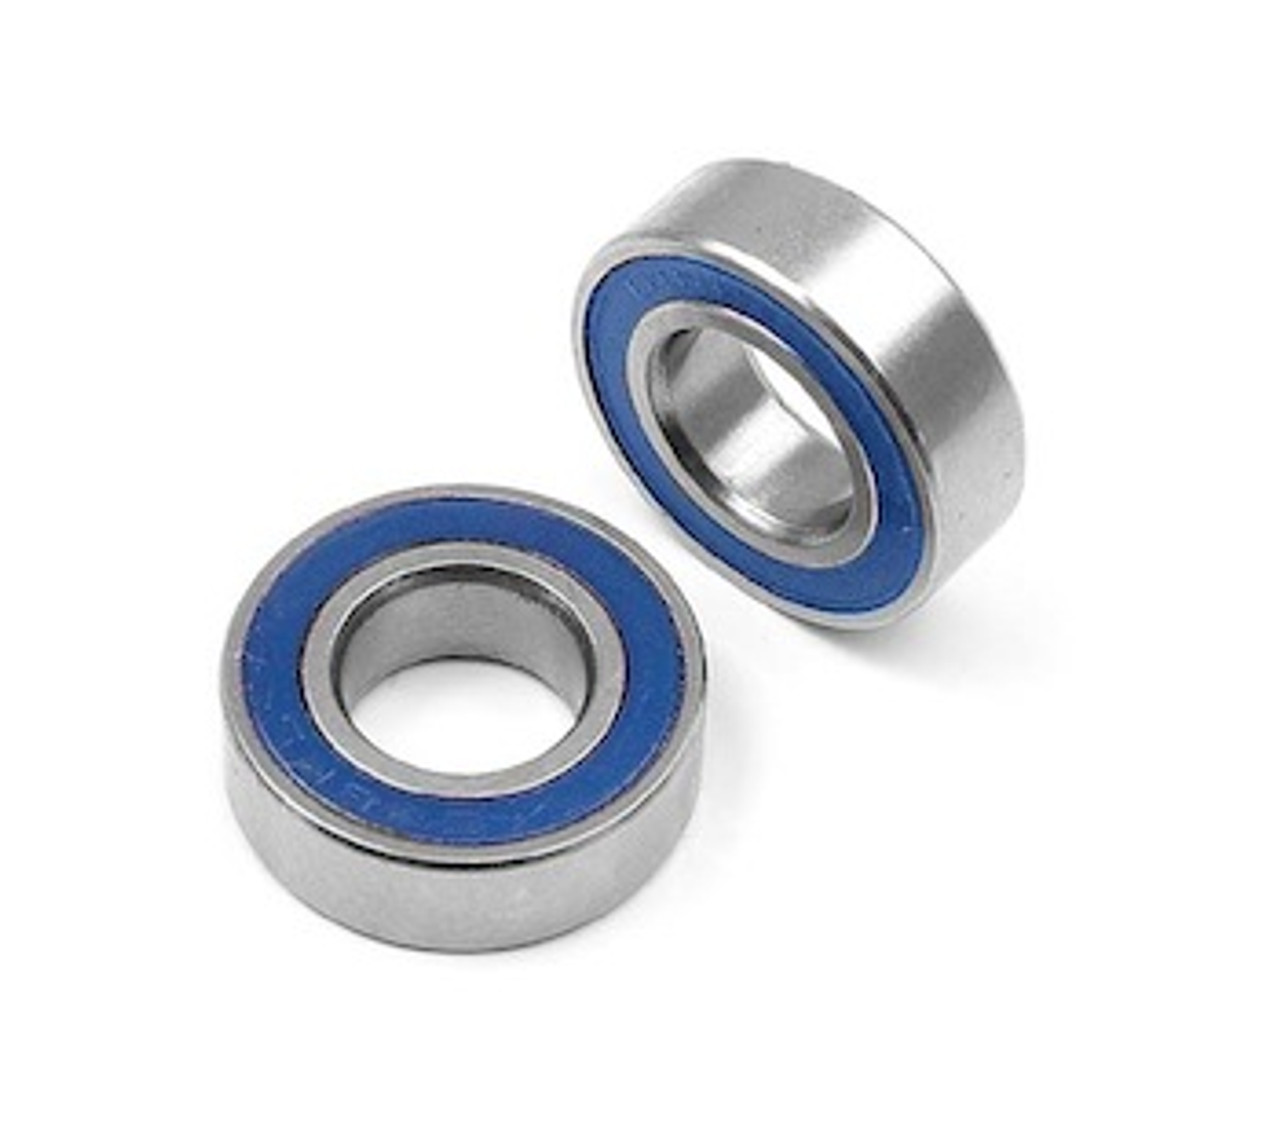 Bearings Metric 3x6x2.5 MM Rubber Sealed (2 Pack) (MR63 2RS)